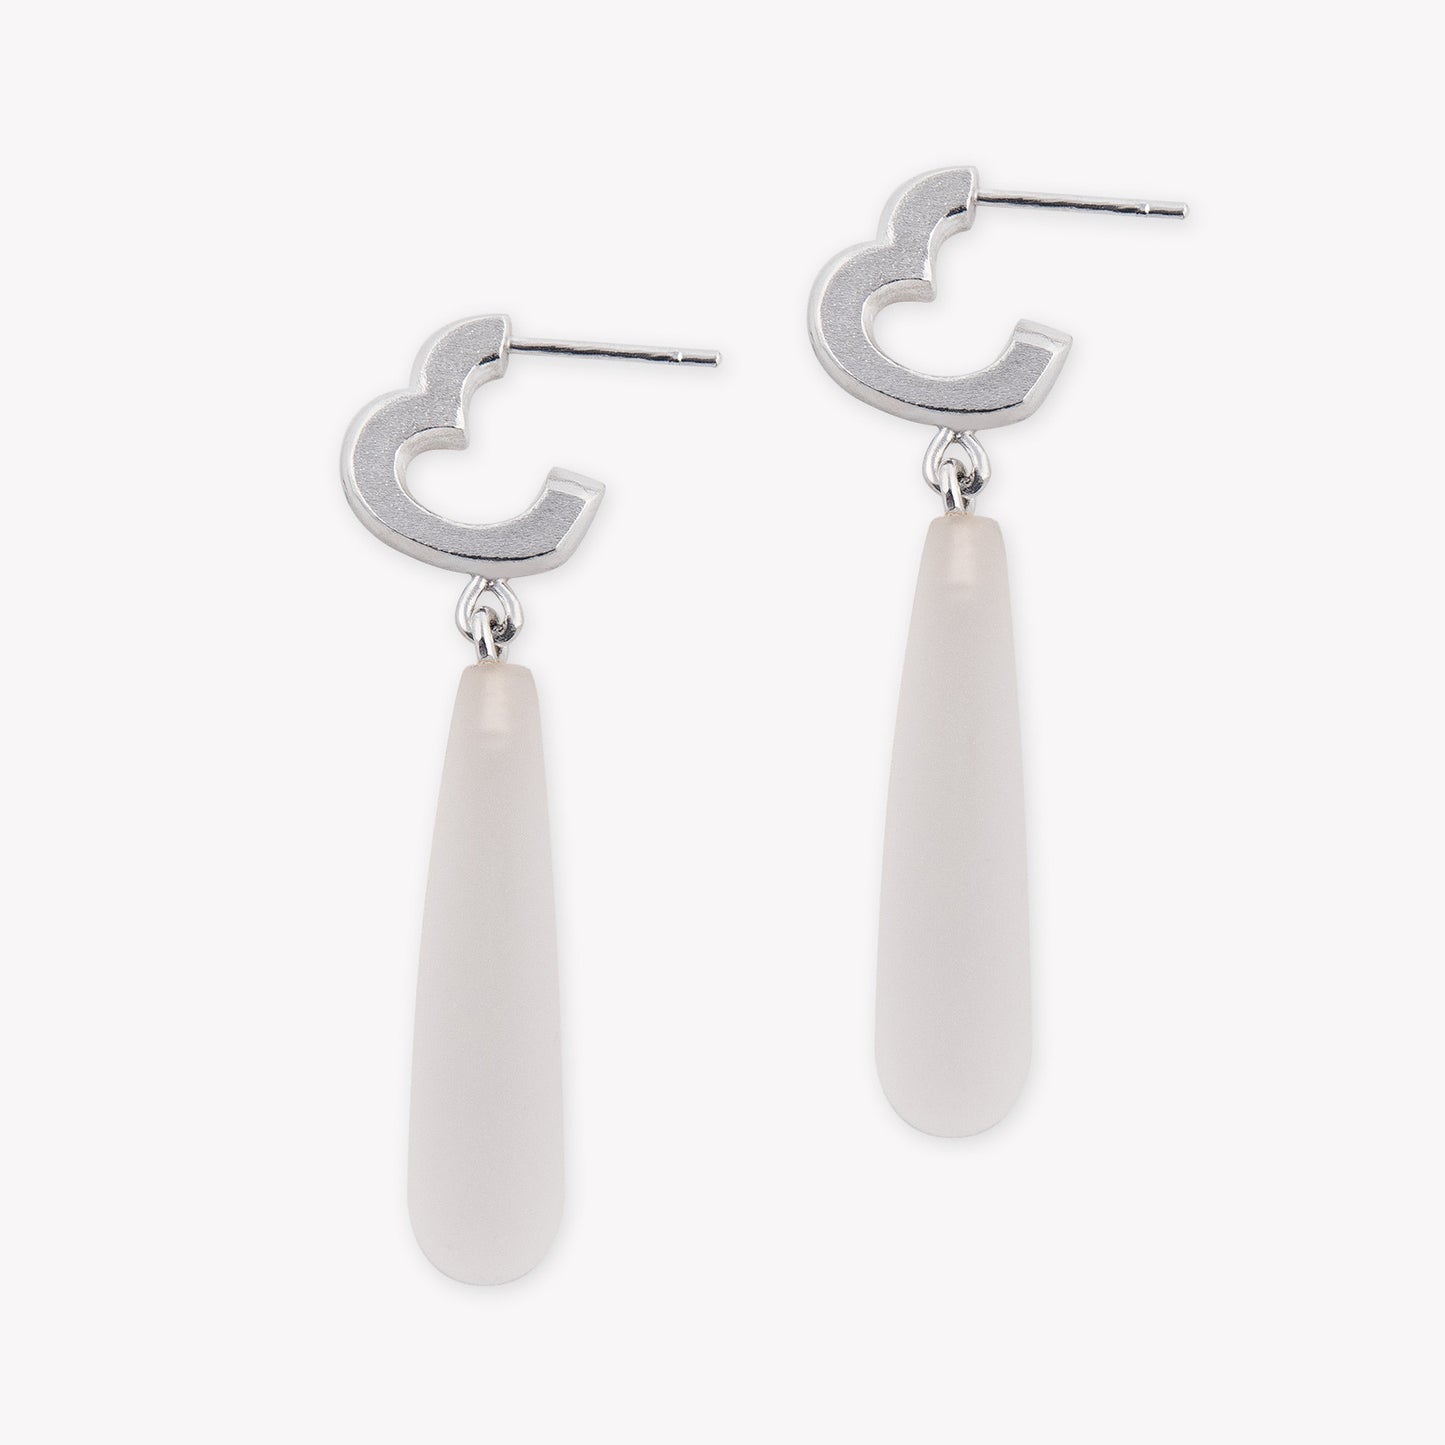 Bubblelove earrings with hanging stones